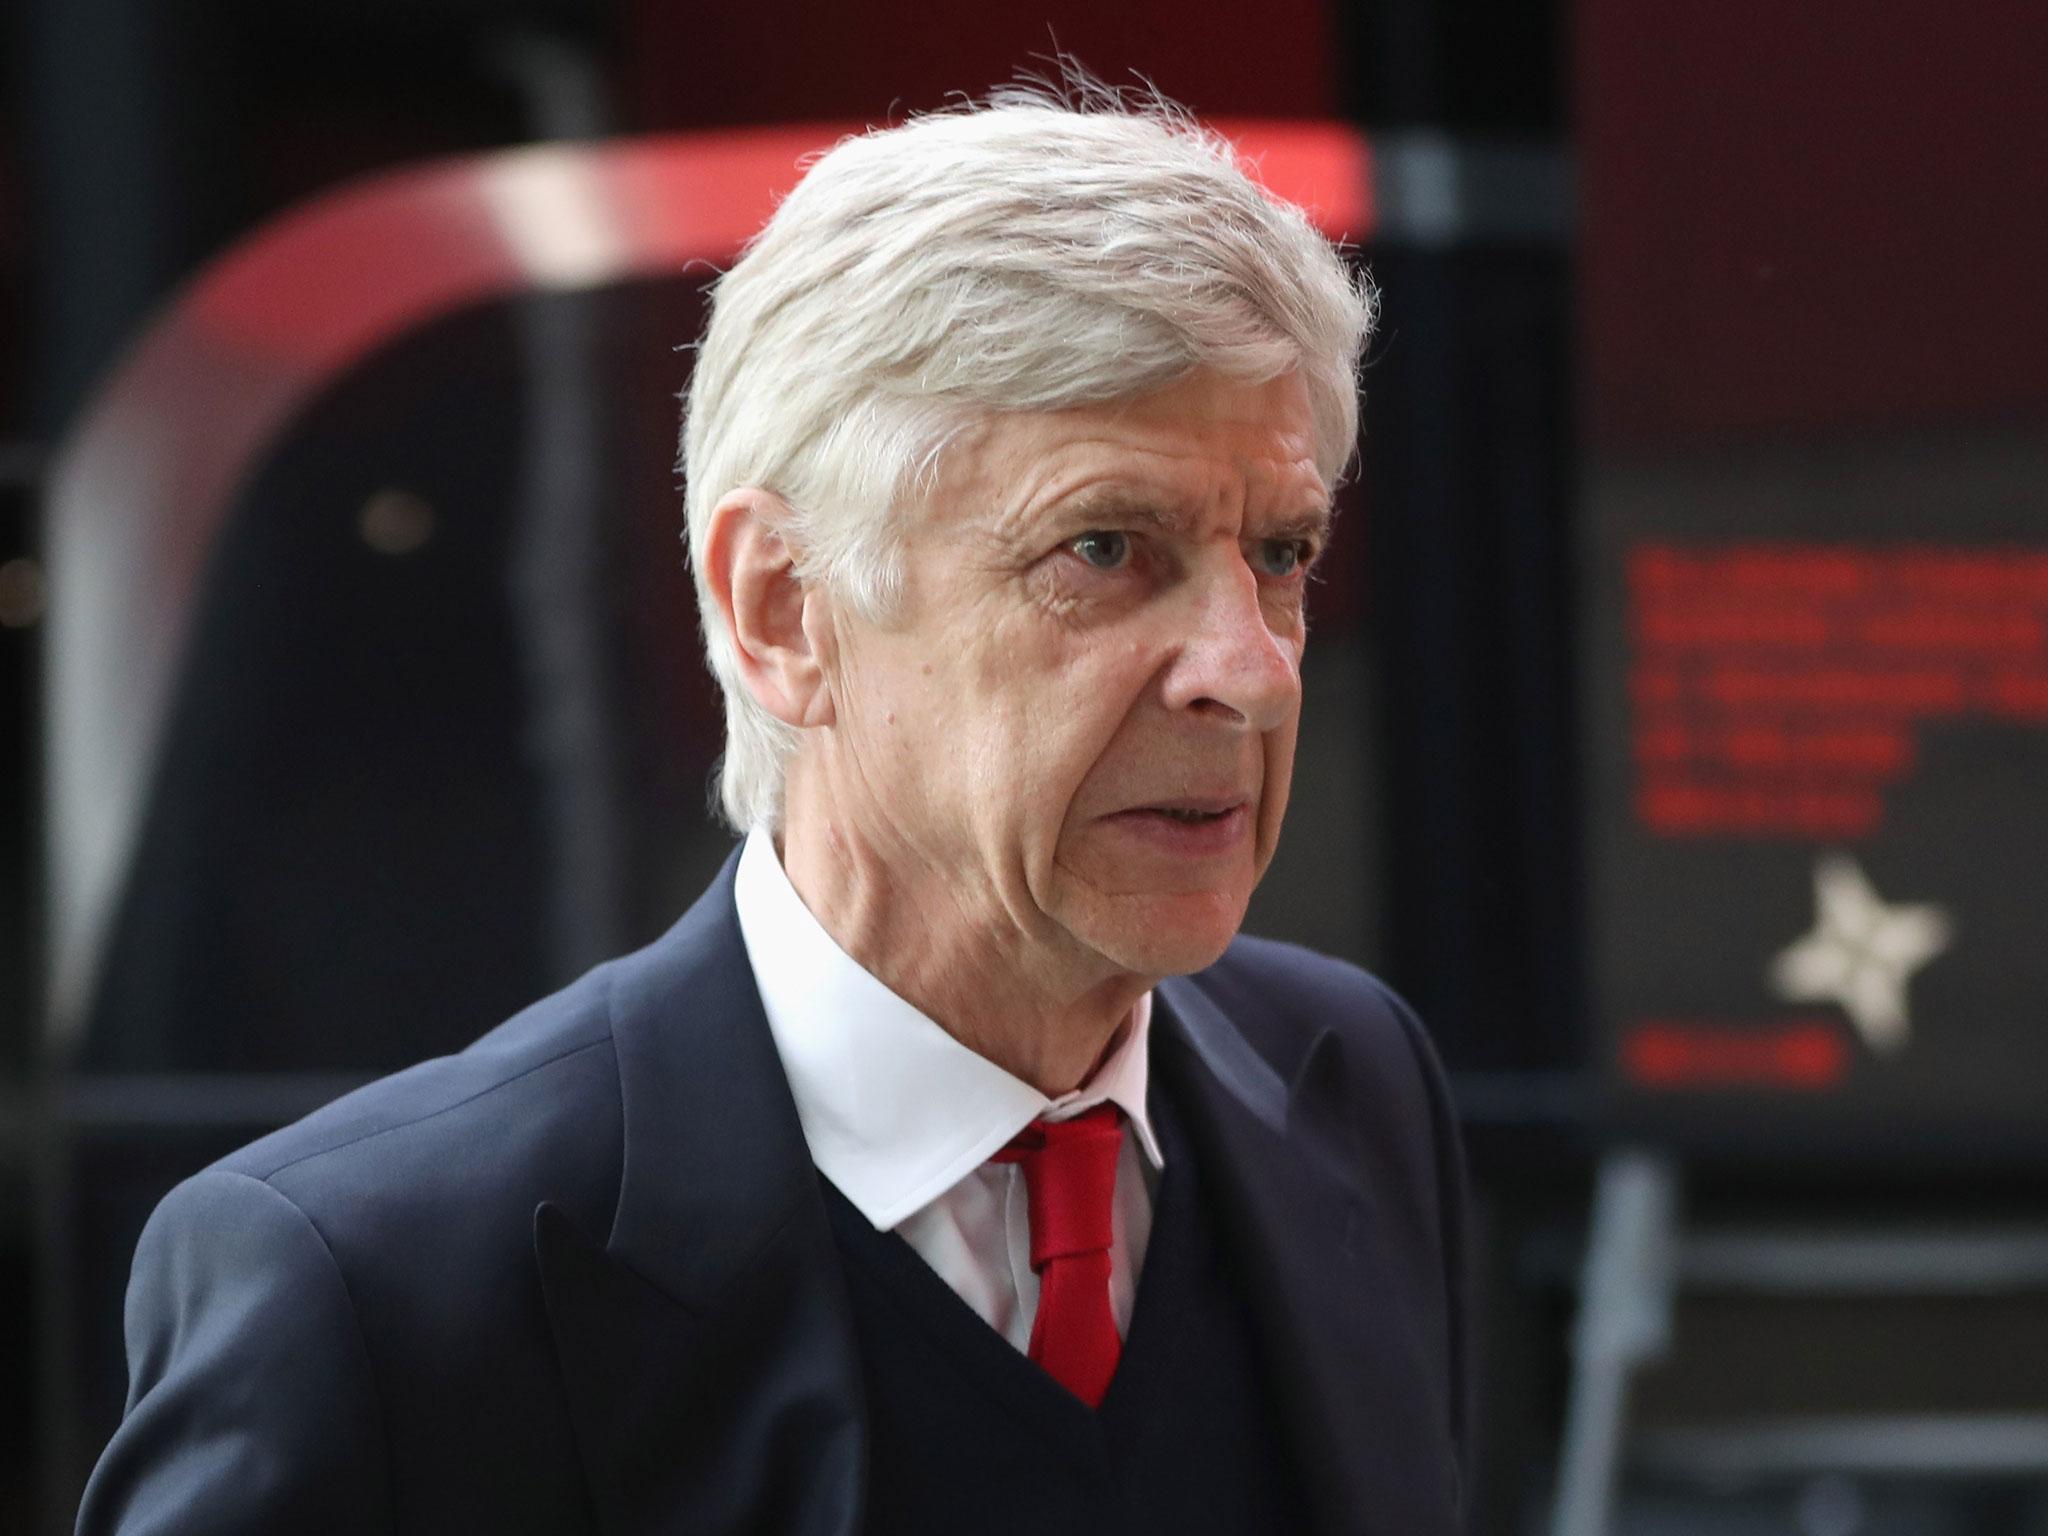 Arsene Wenger says his team are ready to fight for a place in the FA Cup final